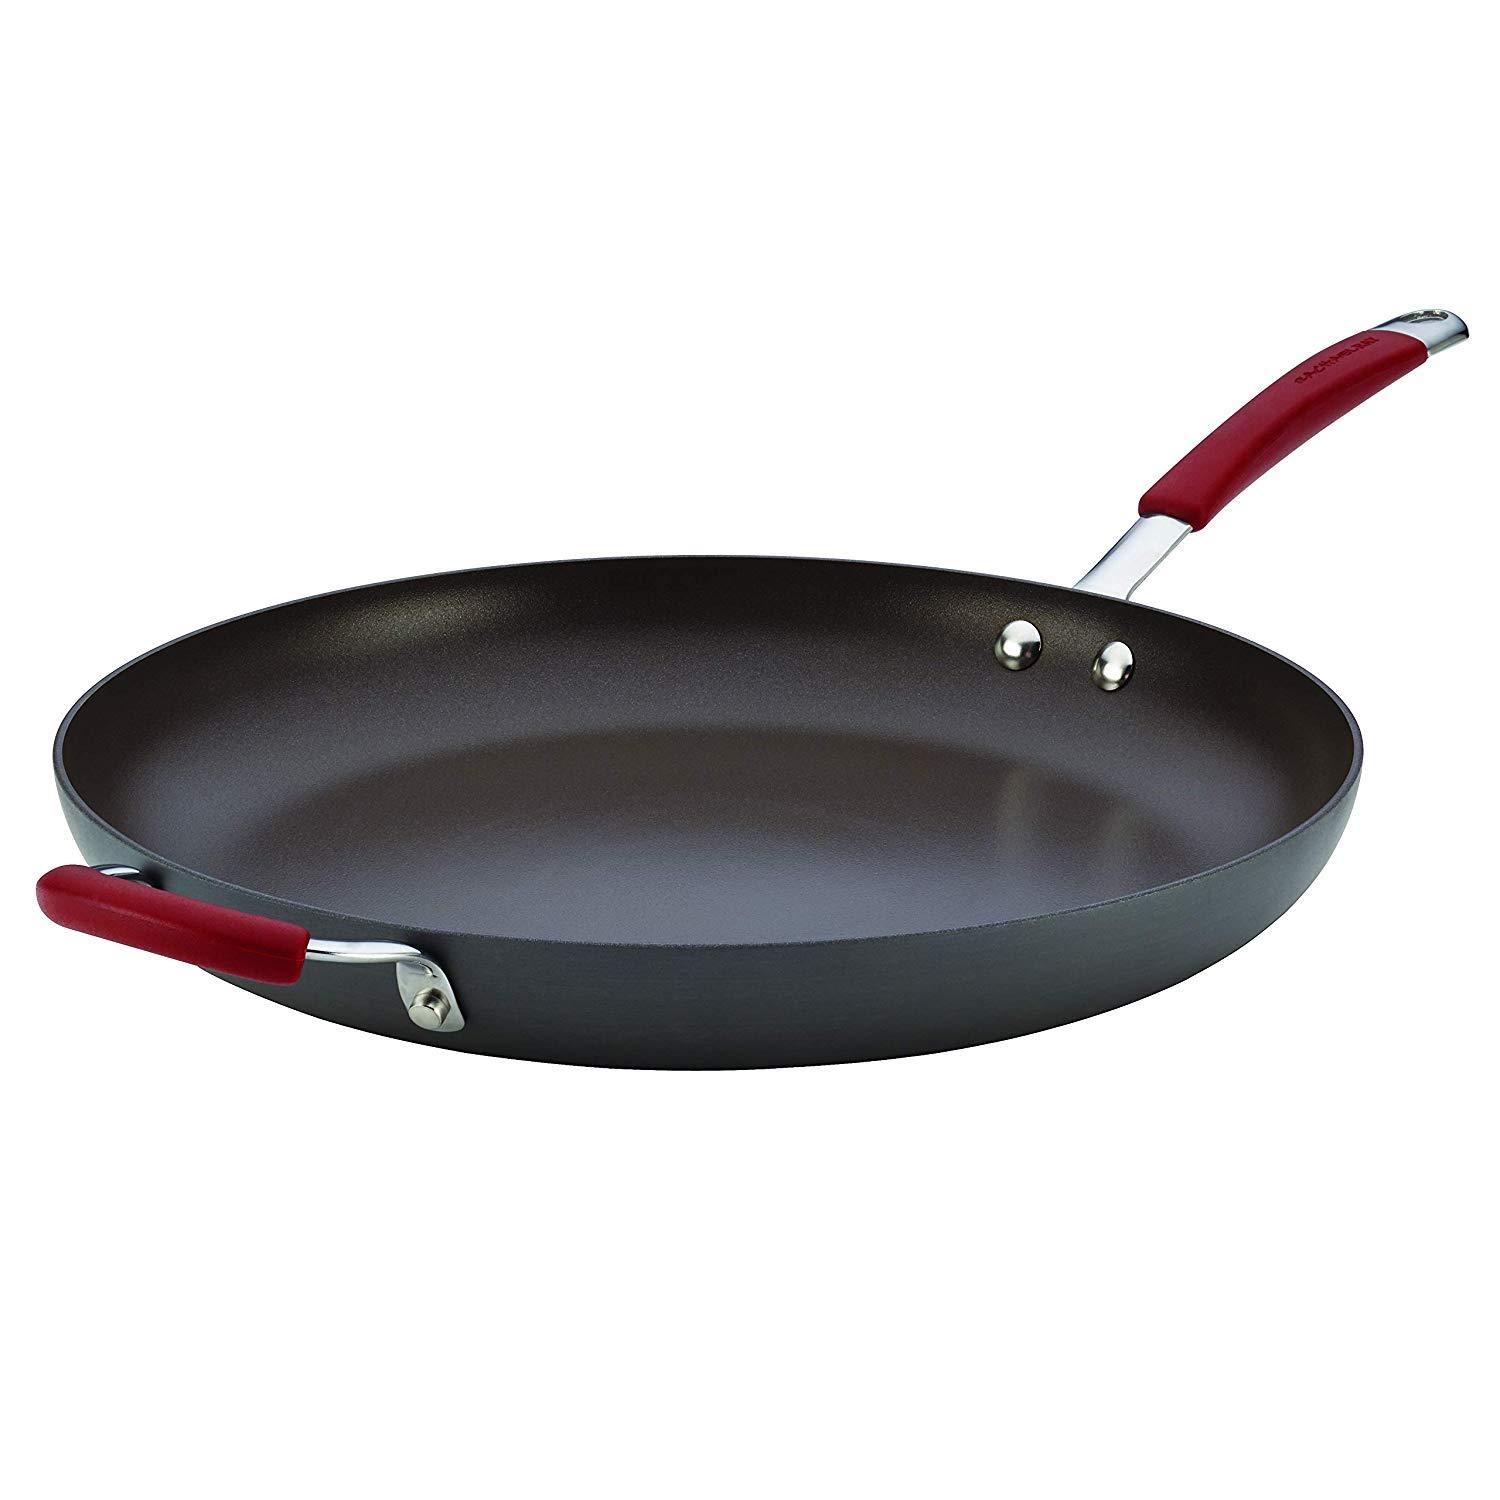 Rachael Ray Cucina Hard-Anodized Even Heat Skillet, 14-Inch